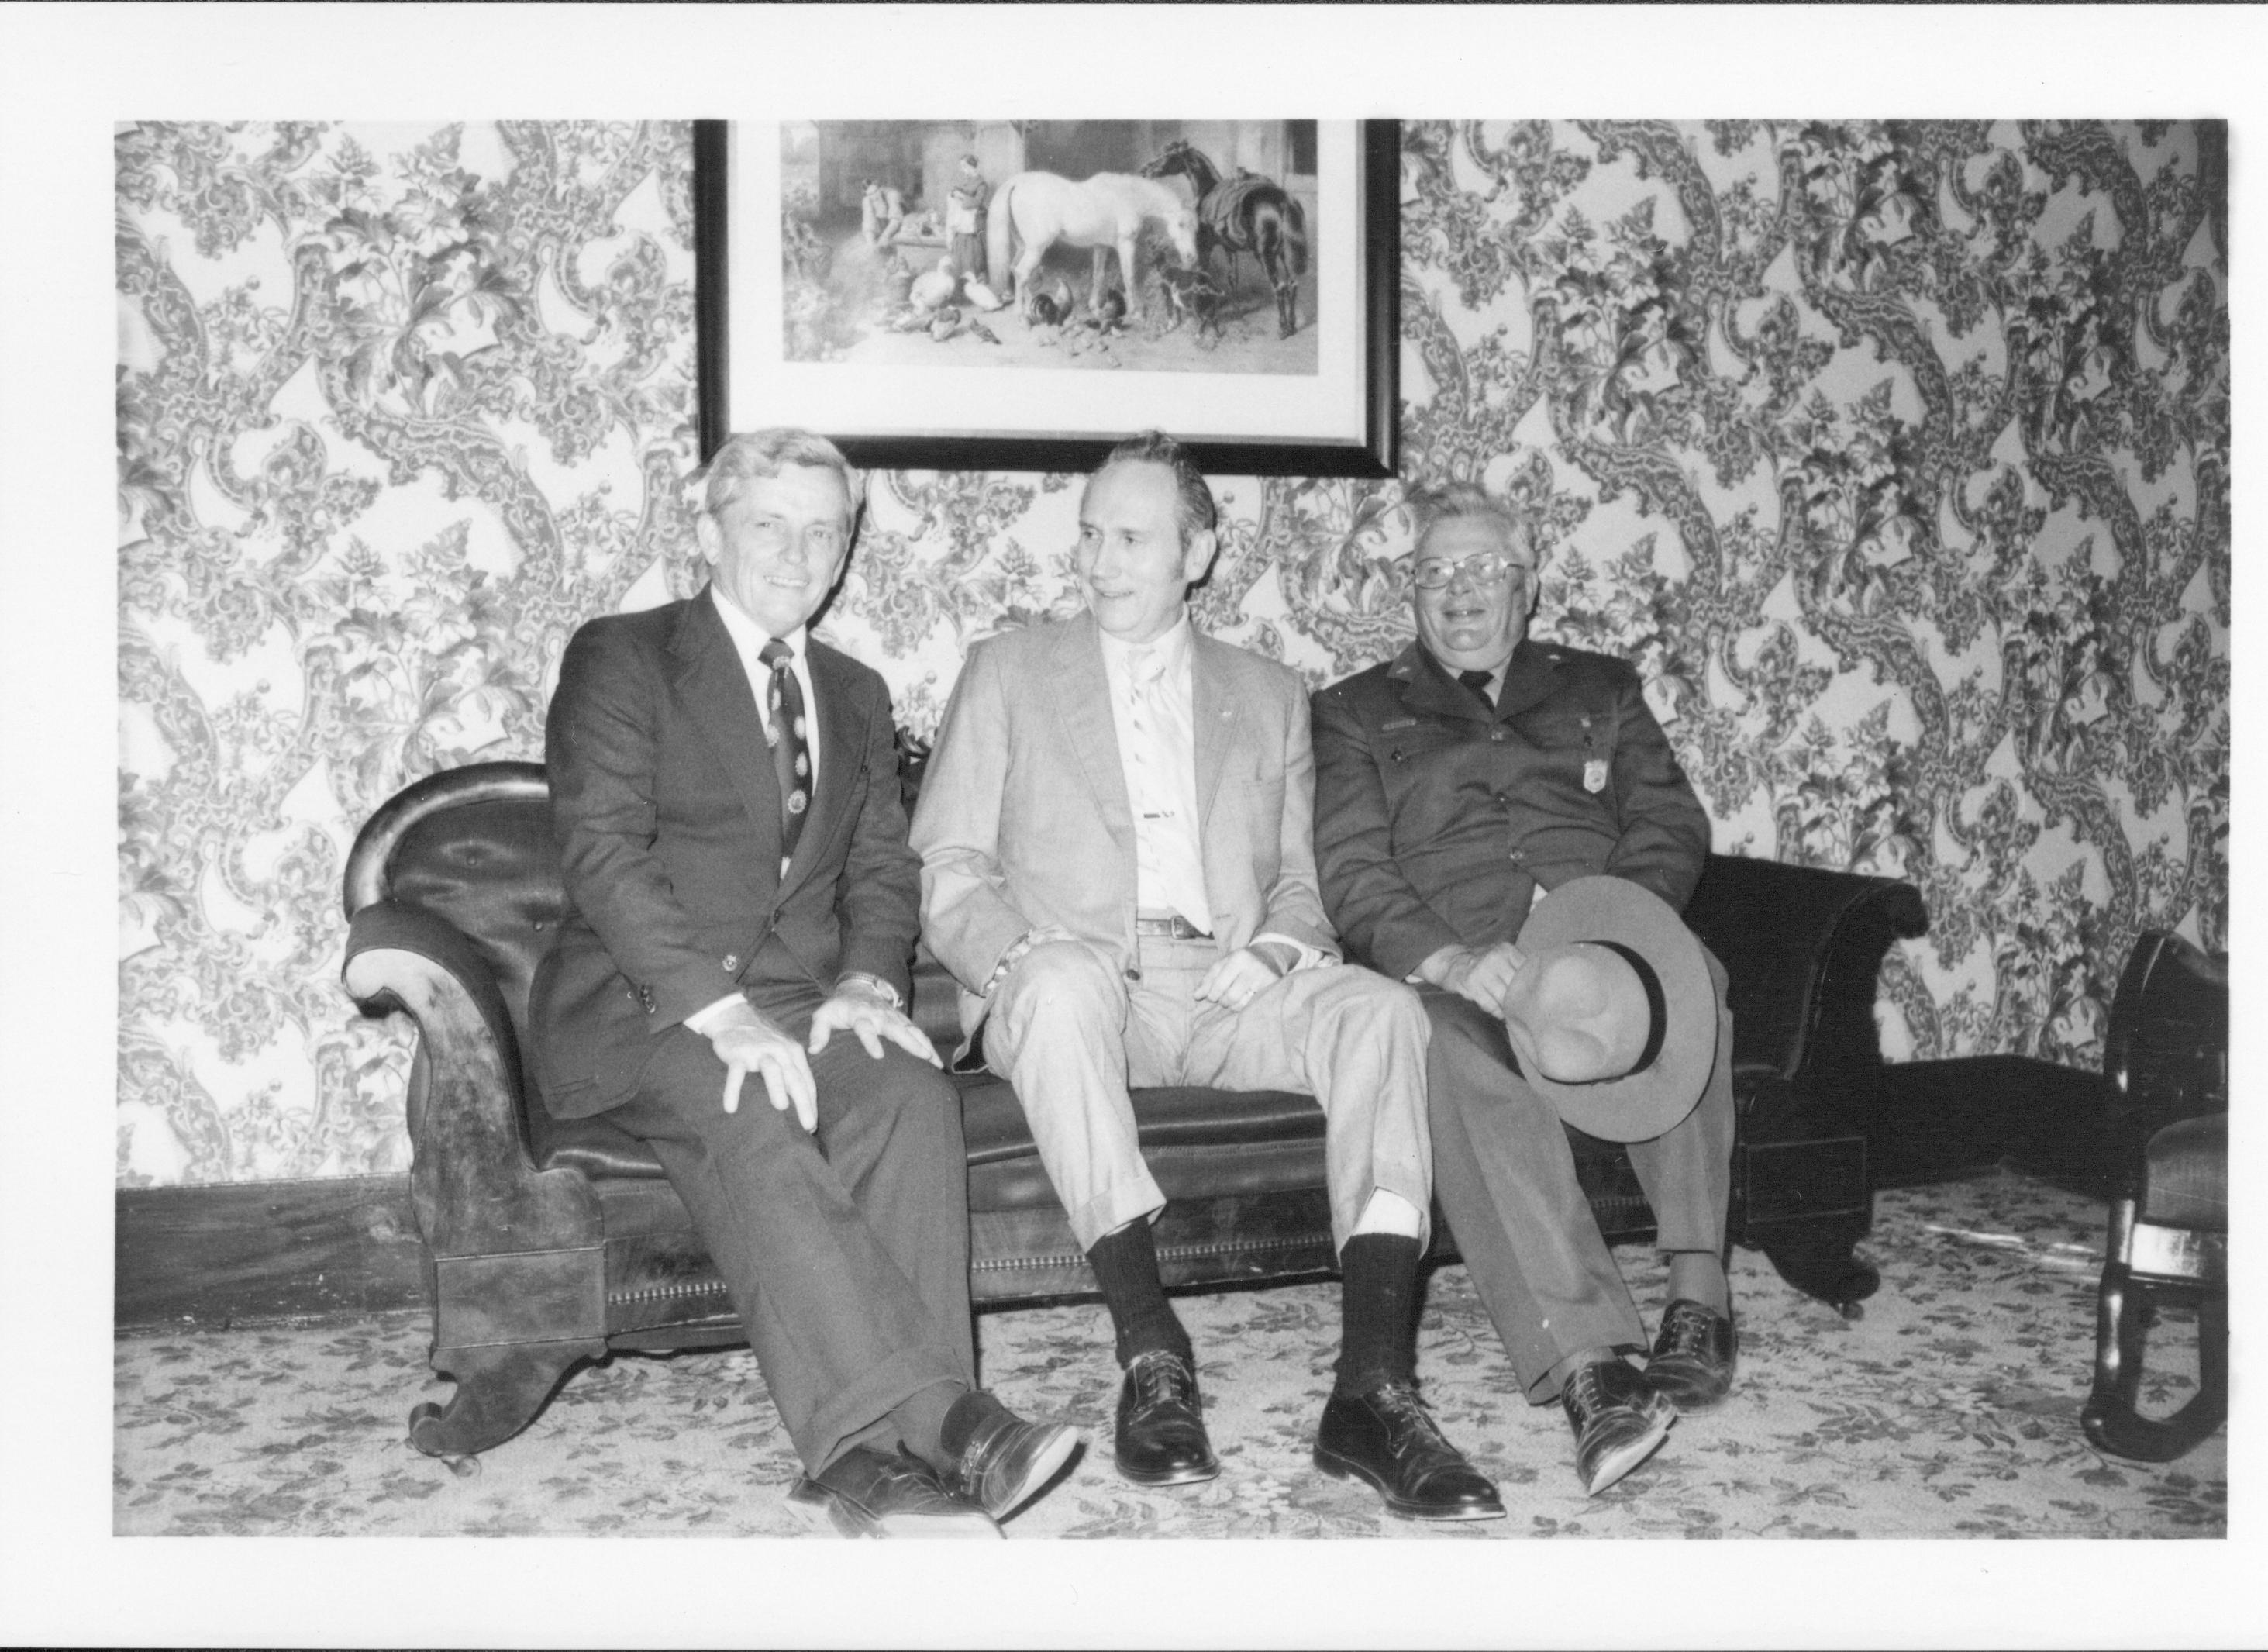 Three men sitting on a sofa. Lincoln Home NHS- Bring Furniture Back Home, neg #17 class #1190, class 8 pic 17 furniture, move